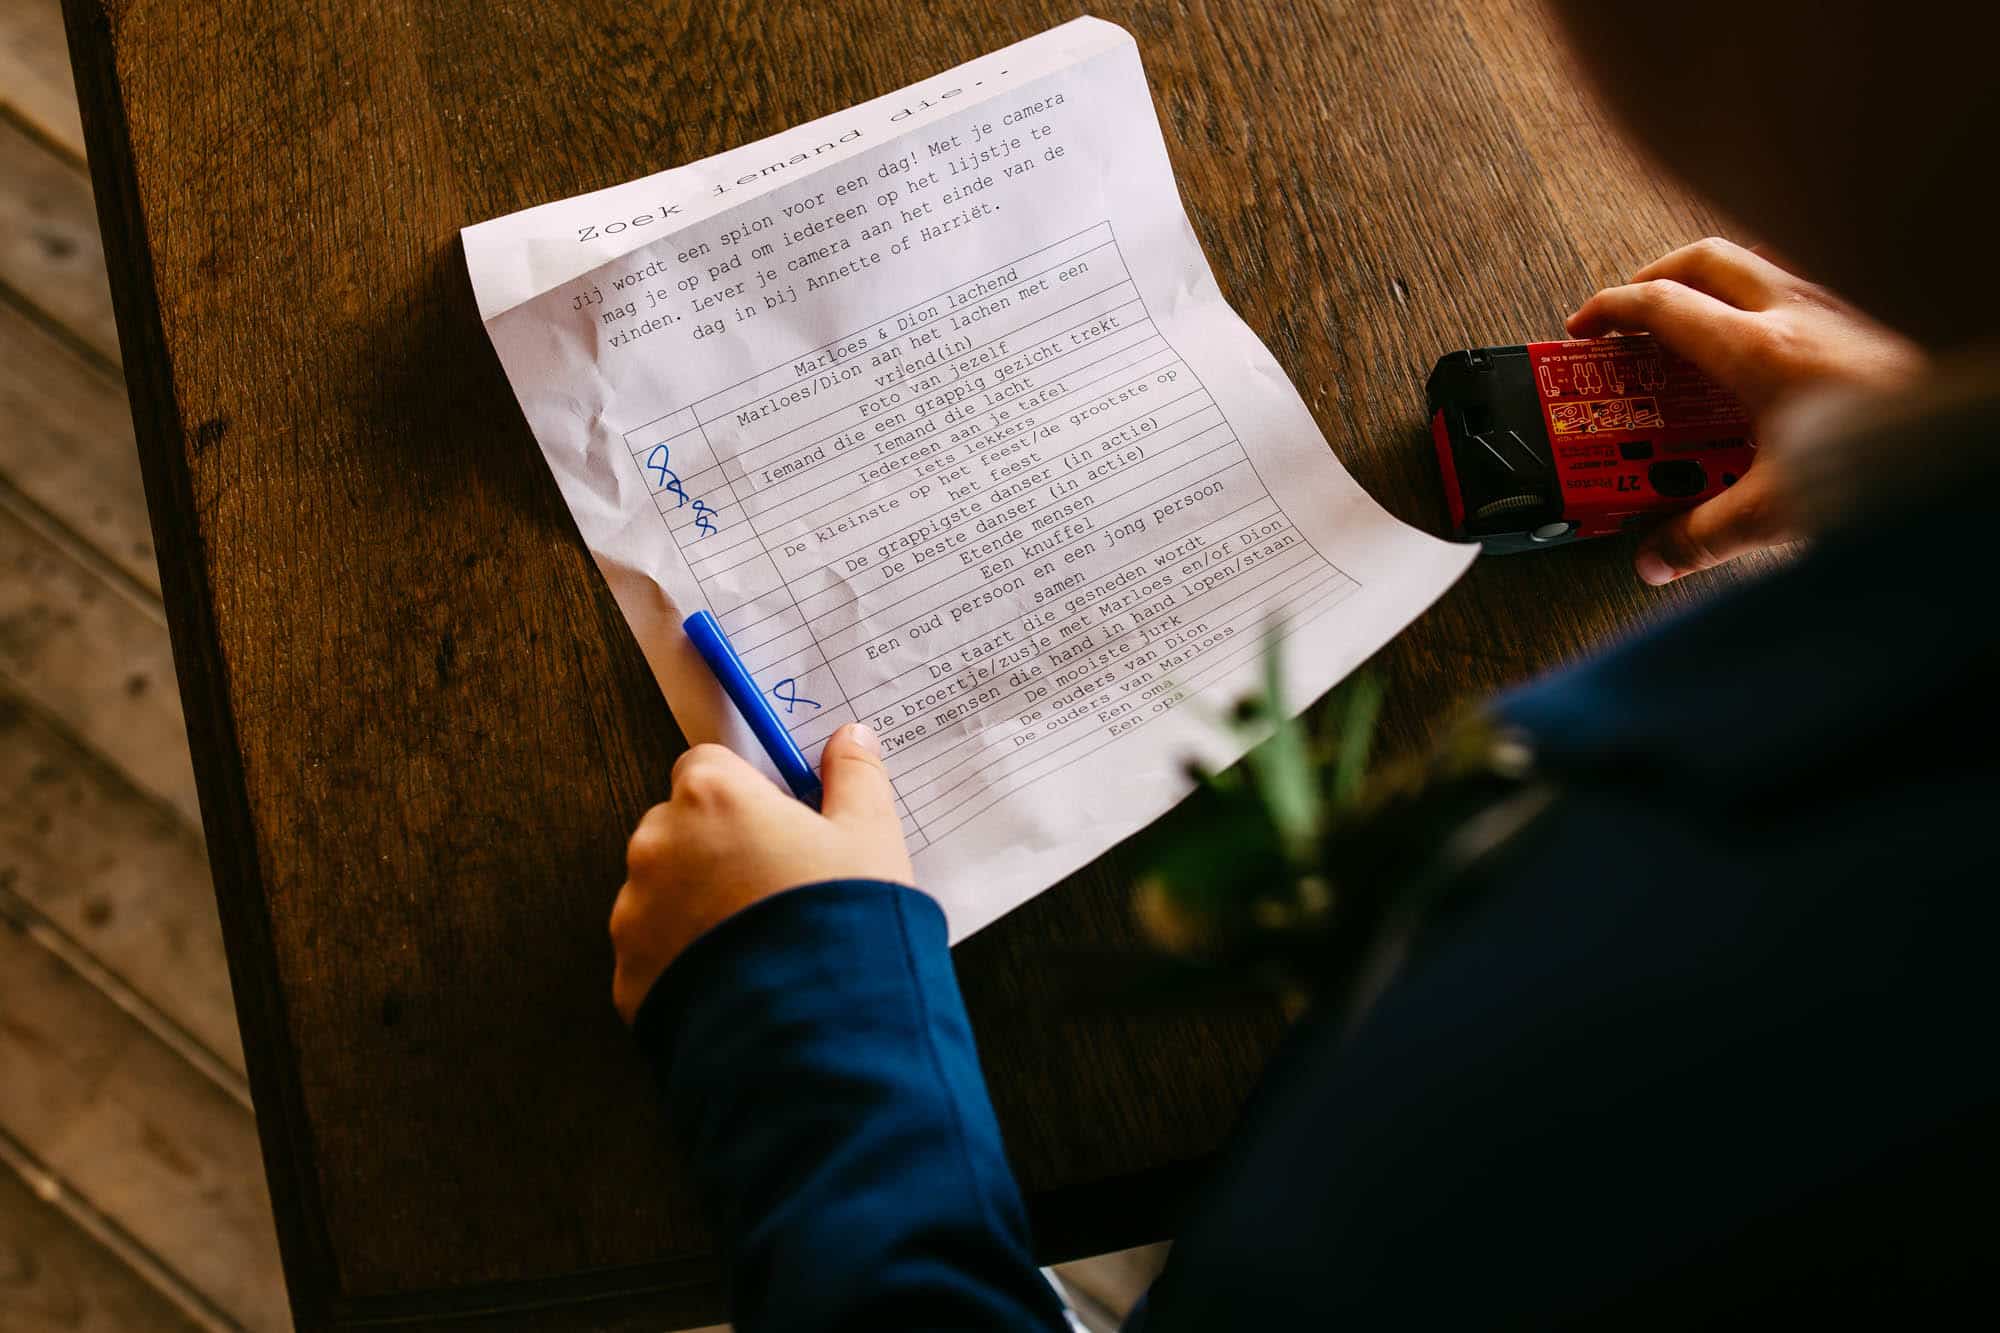 A person writing on a piece of paper during a wedding.